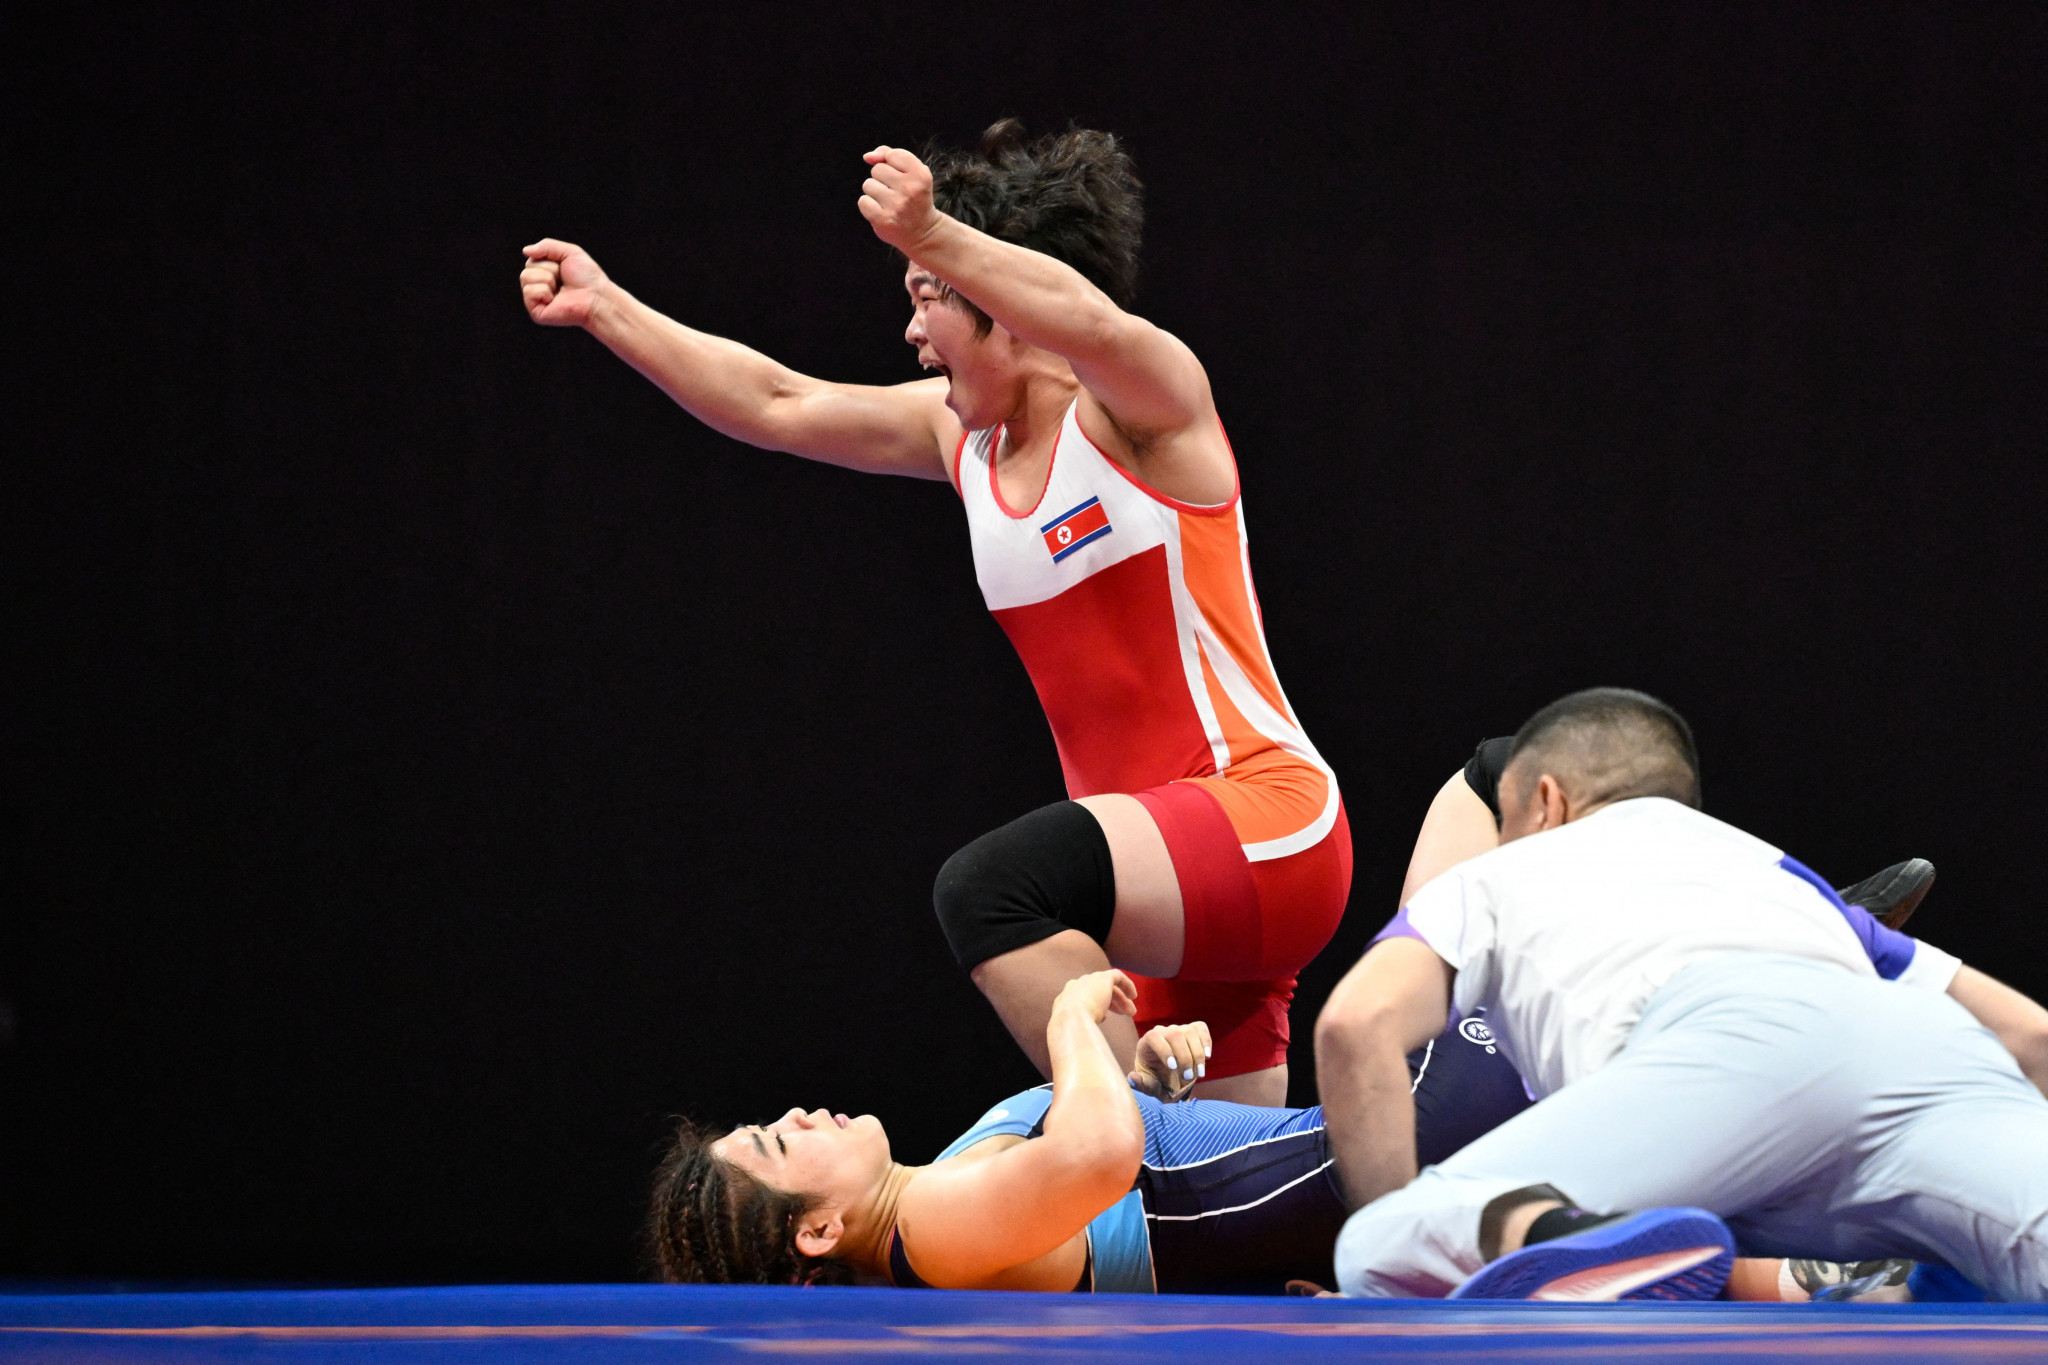 North Korean Mun Hyong-yong produced a fantastic comeback to win the women's under-63kg freestyle wrestling gold medal after being 6-0 down ©Getty Images